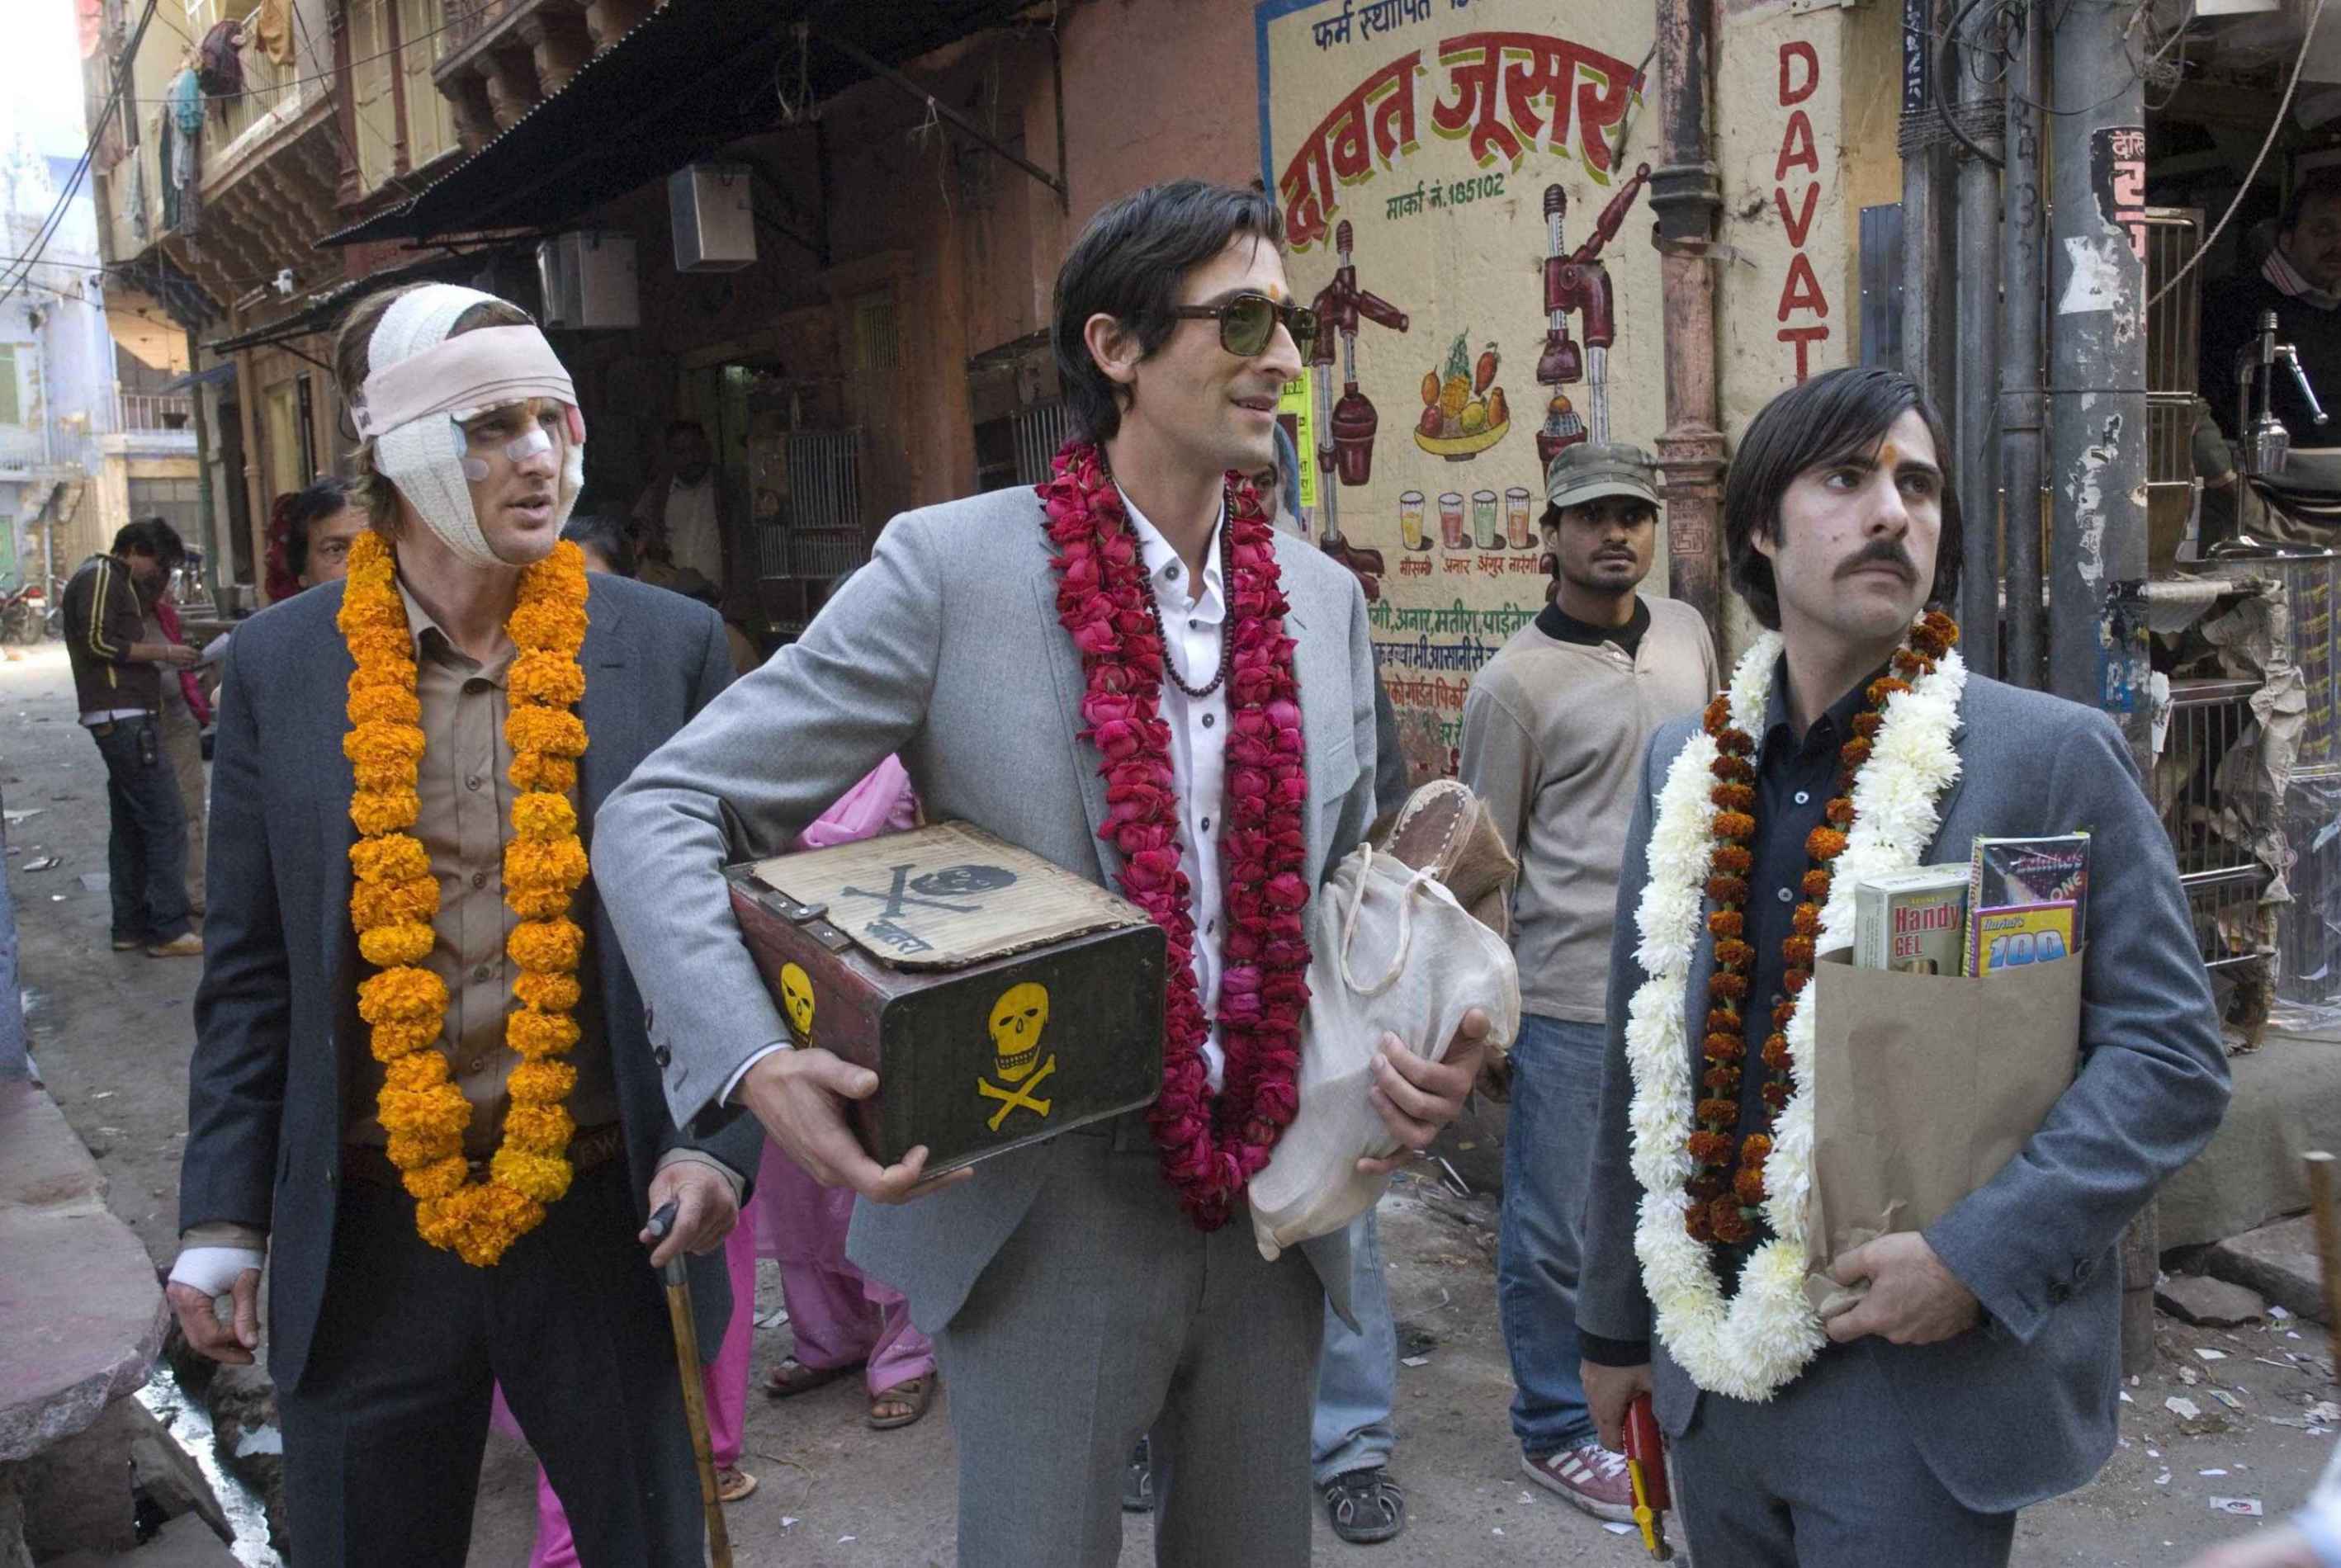 Darjeeling Limited luggage by Very Troubled Child. (Explanation in